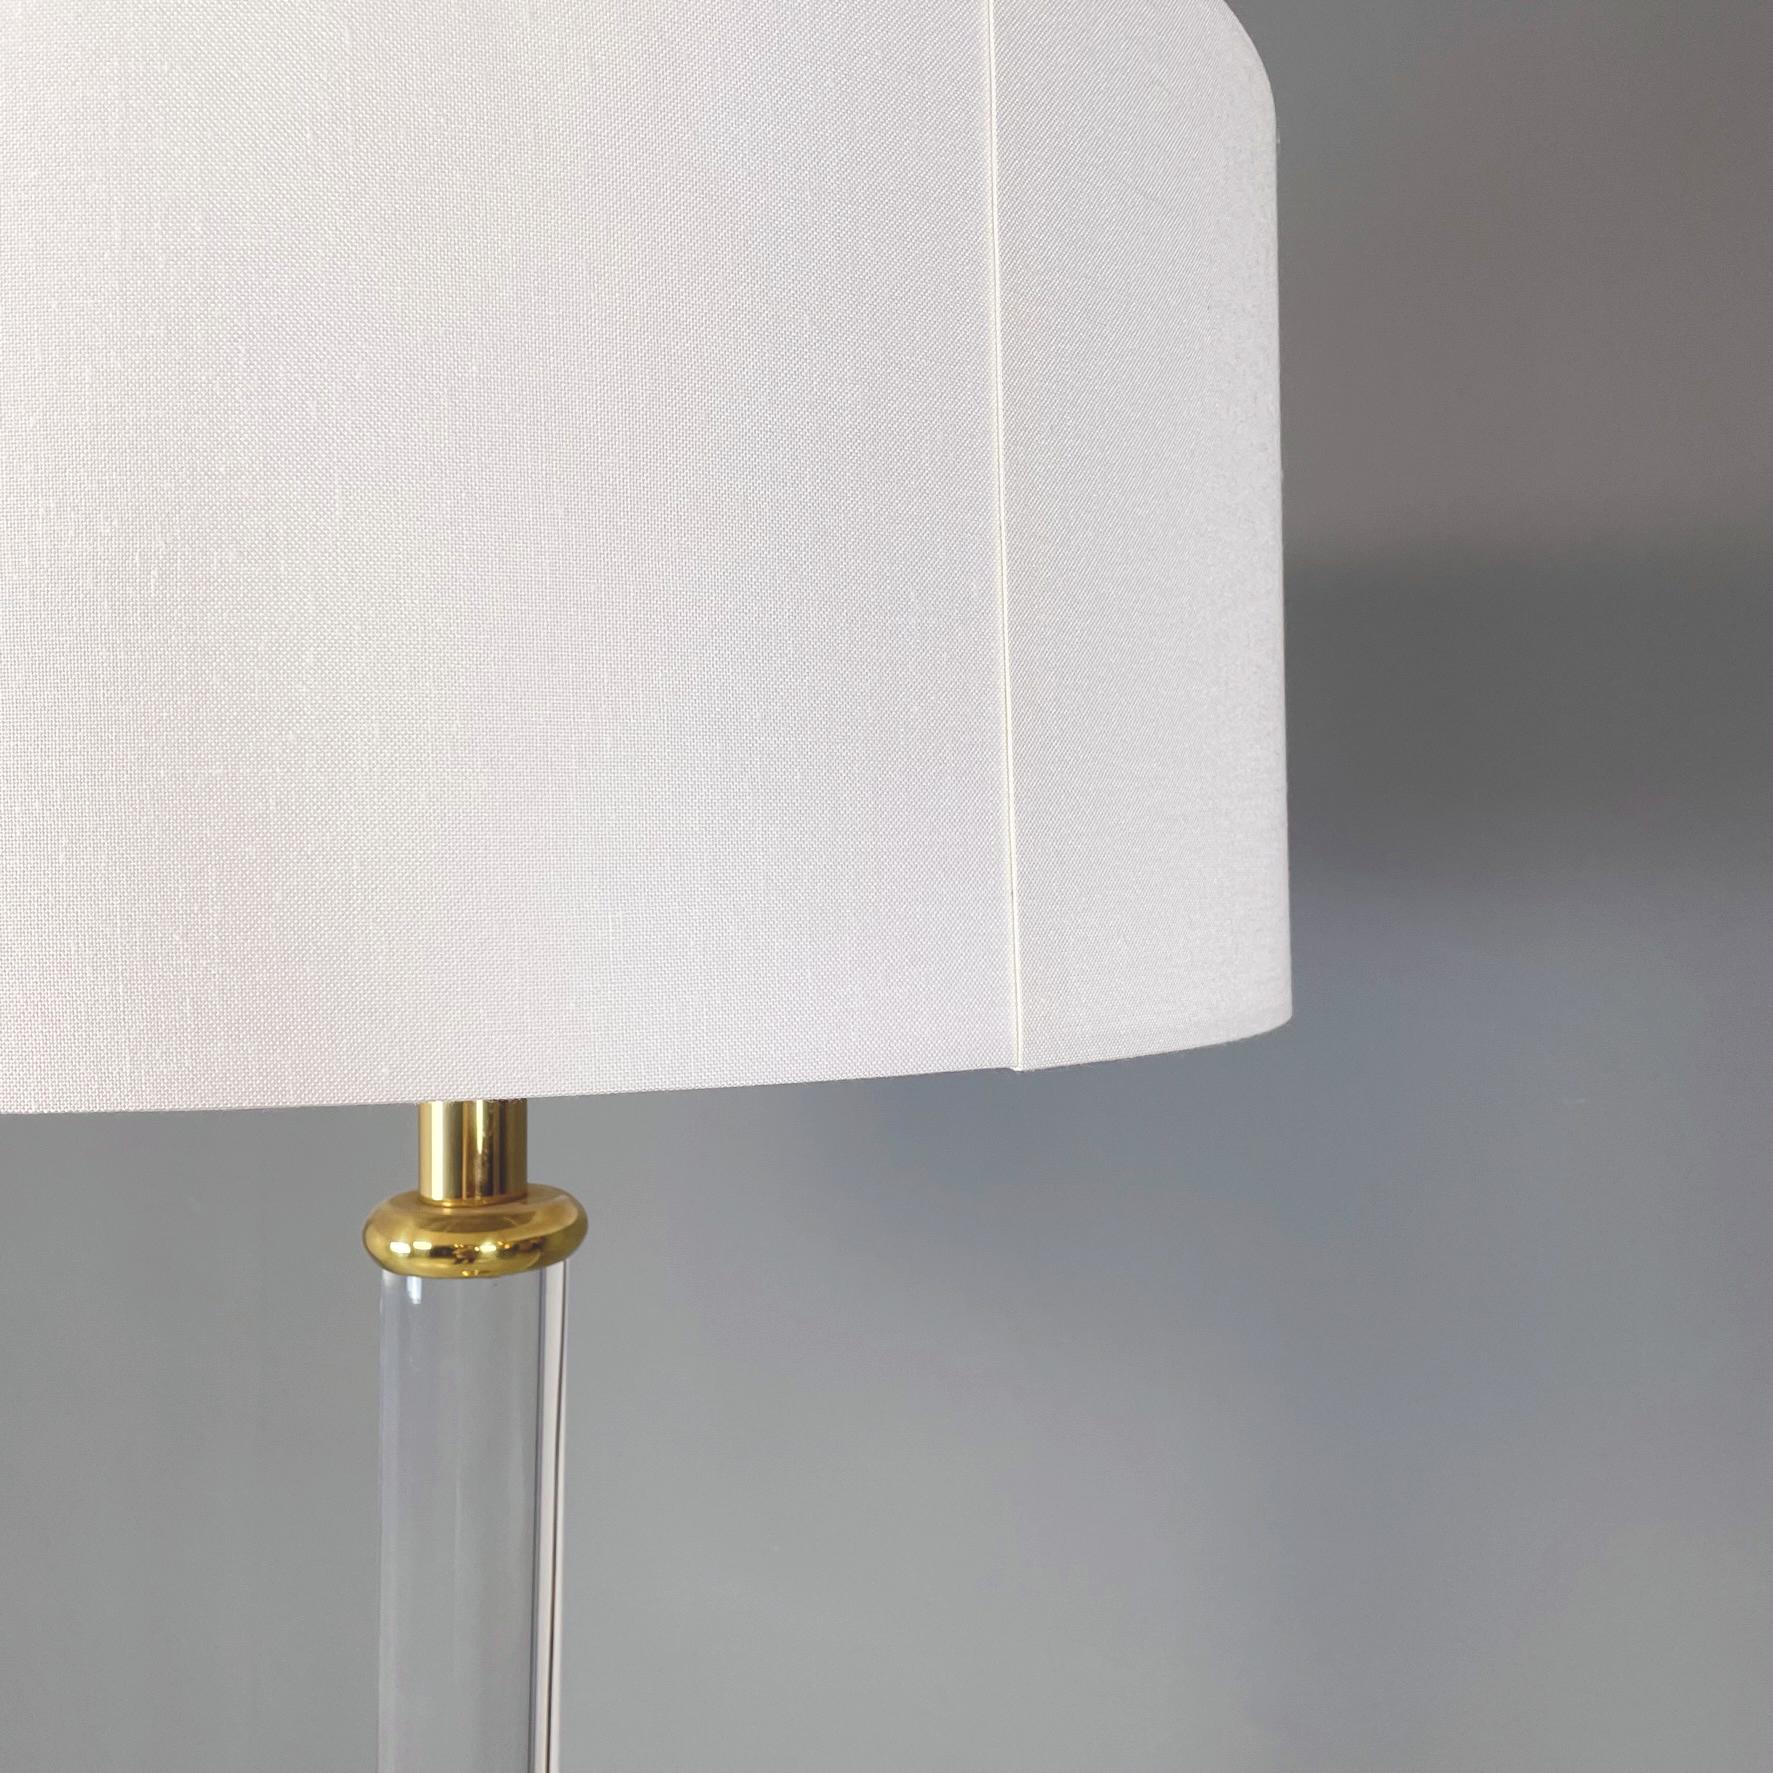 Italian Modern Floor Lamp in White Fabric Lampshade, Plexiglass and Brass, 1980s For Sale 1